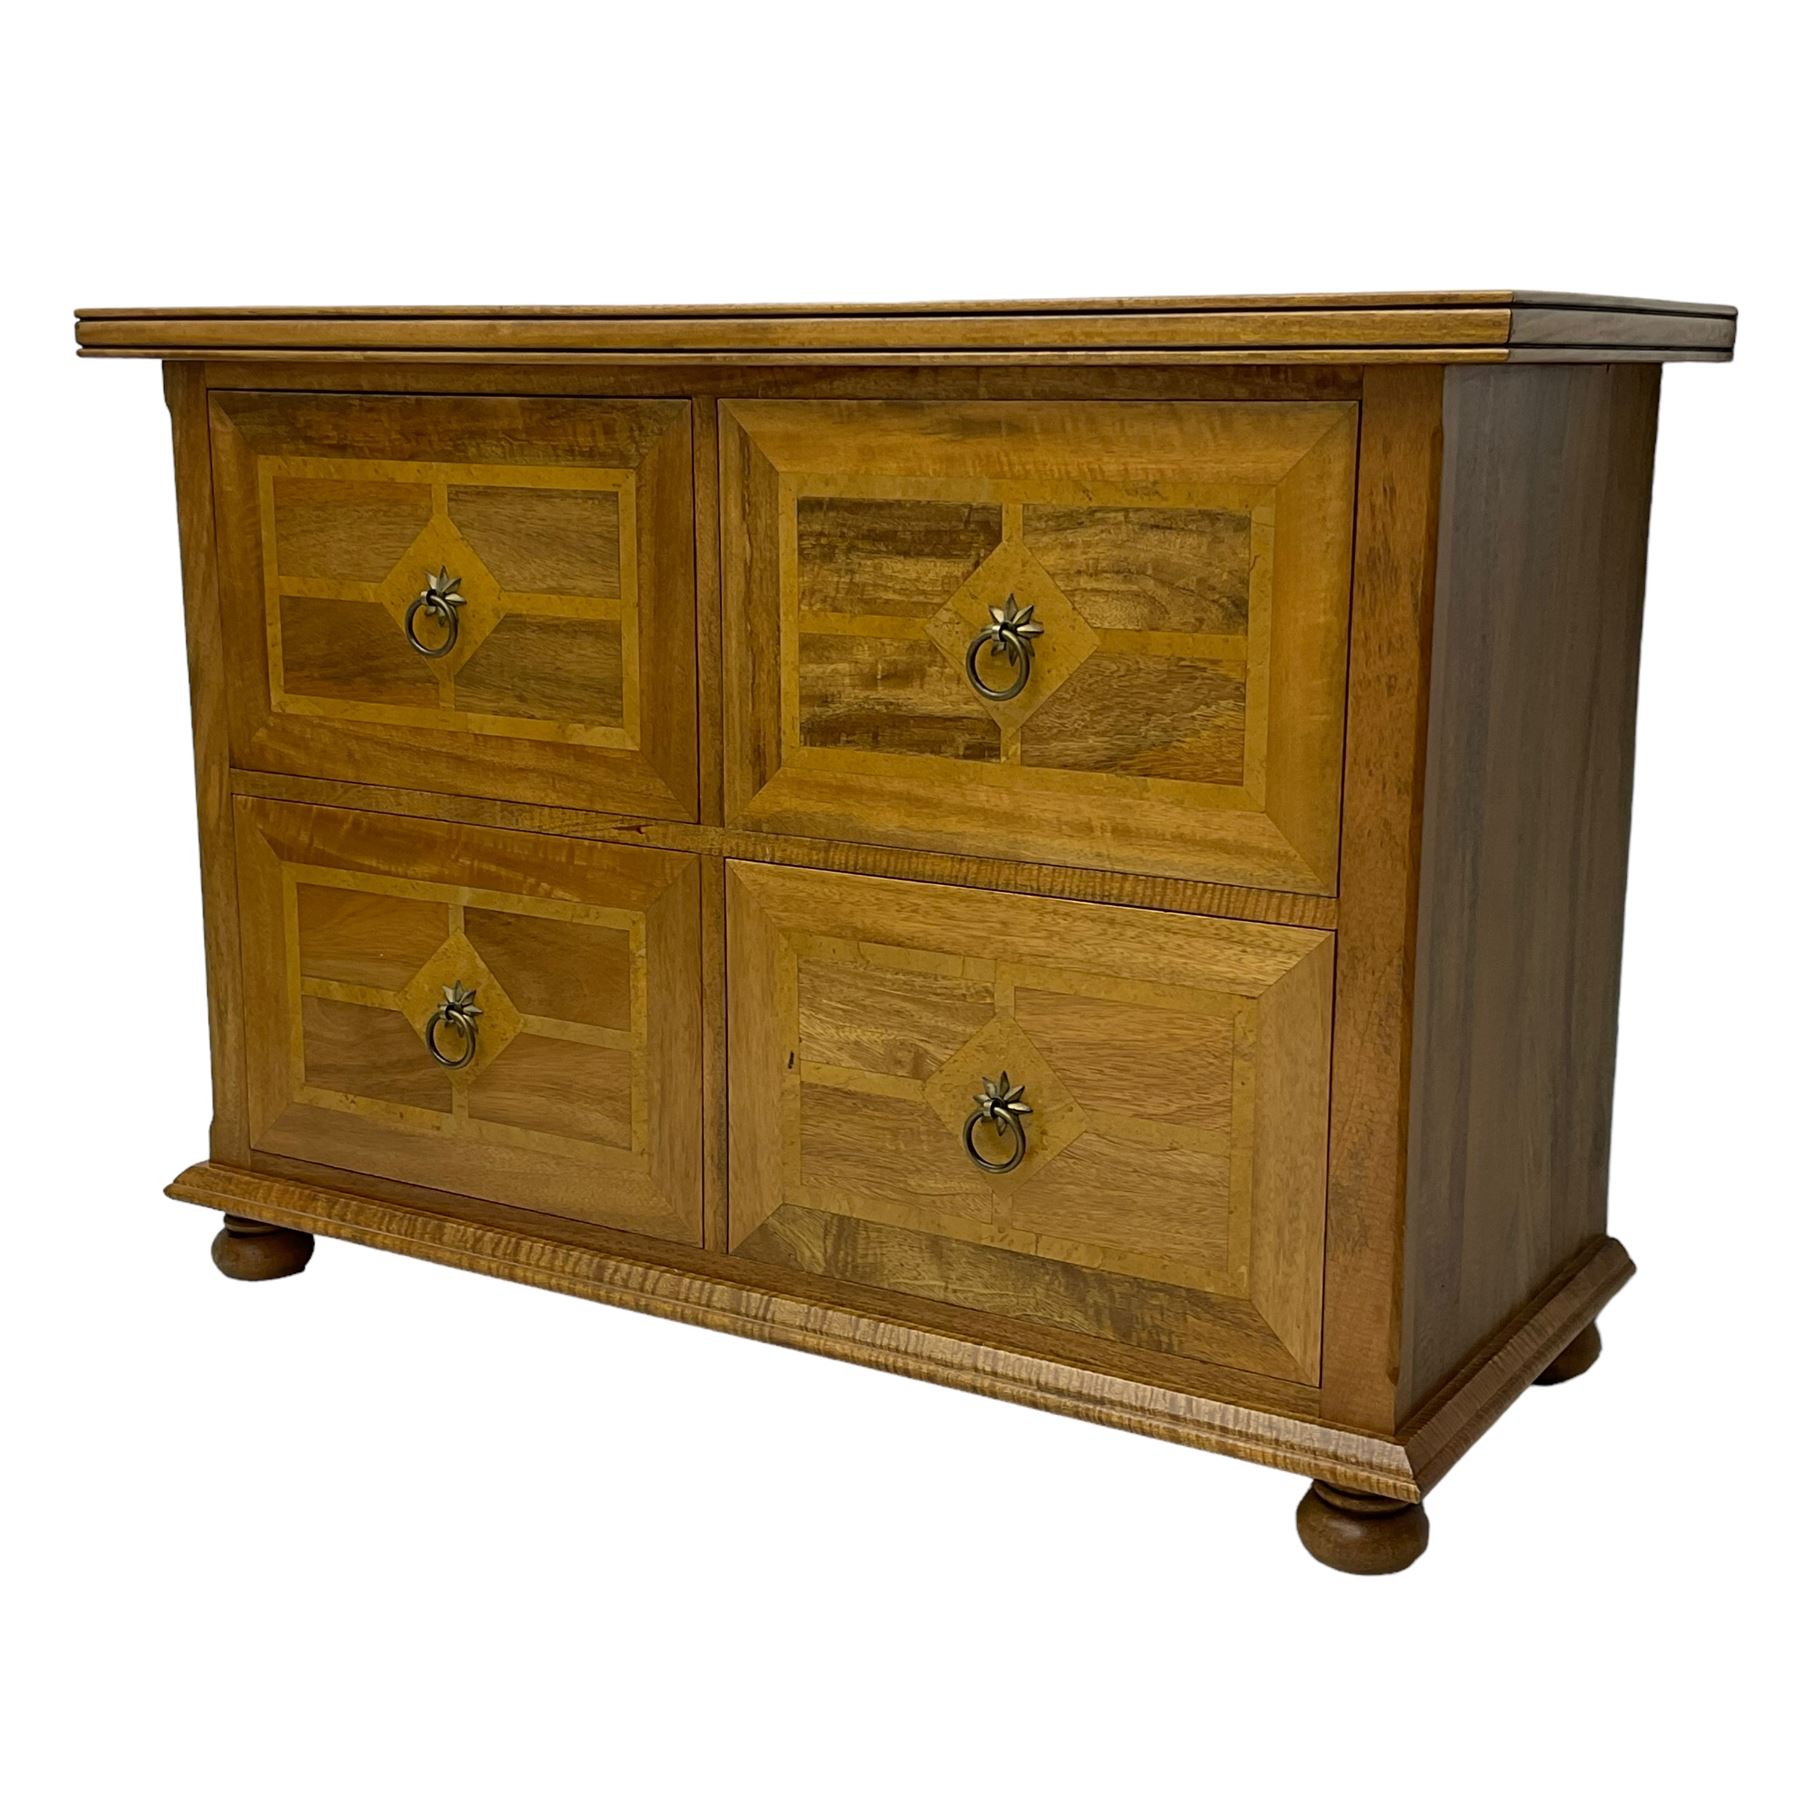 Barker & Stonehouse - flagstone chest fitted with four drawers - Image 4 of 5